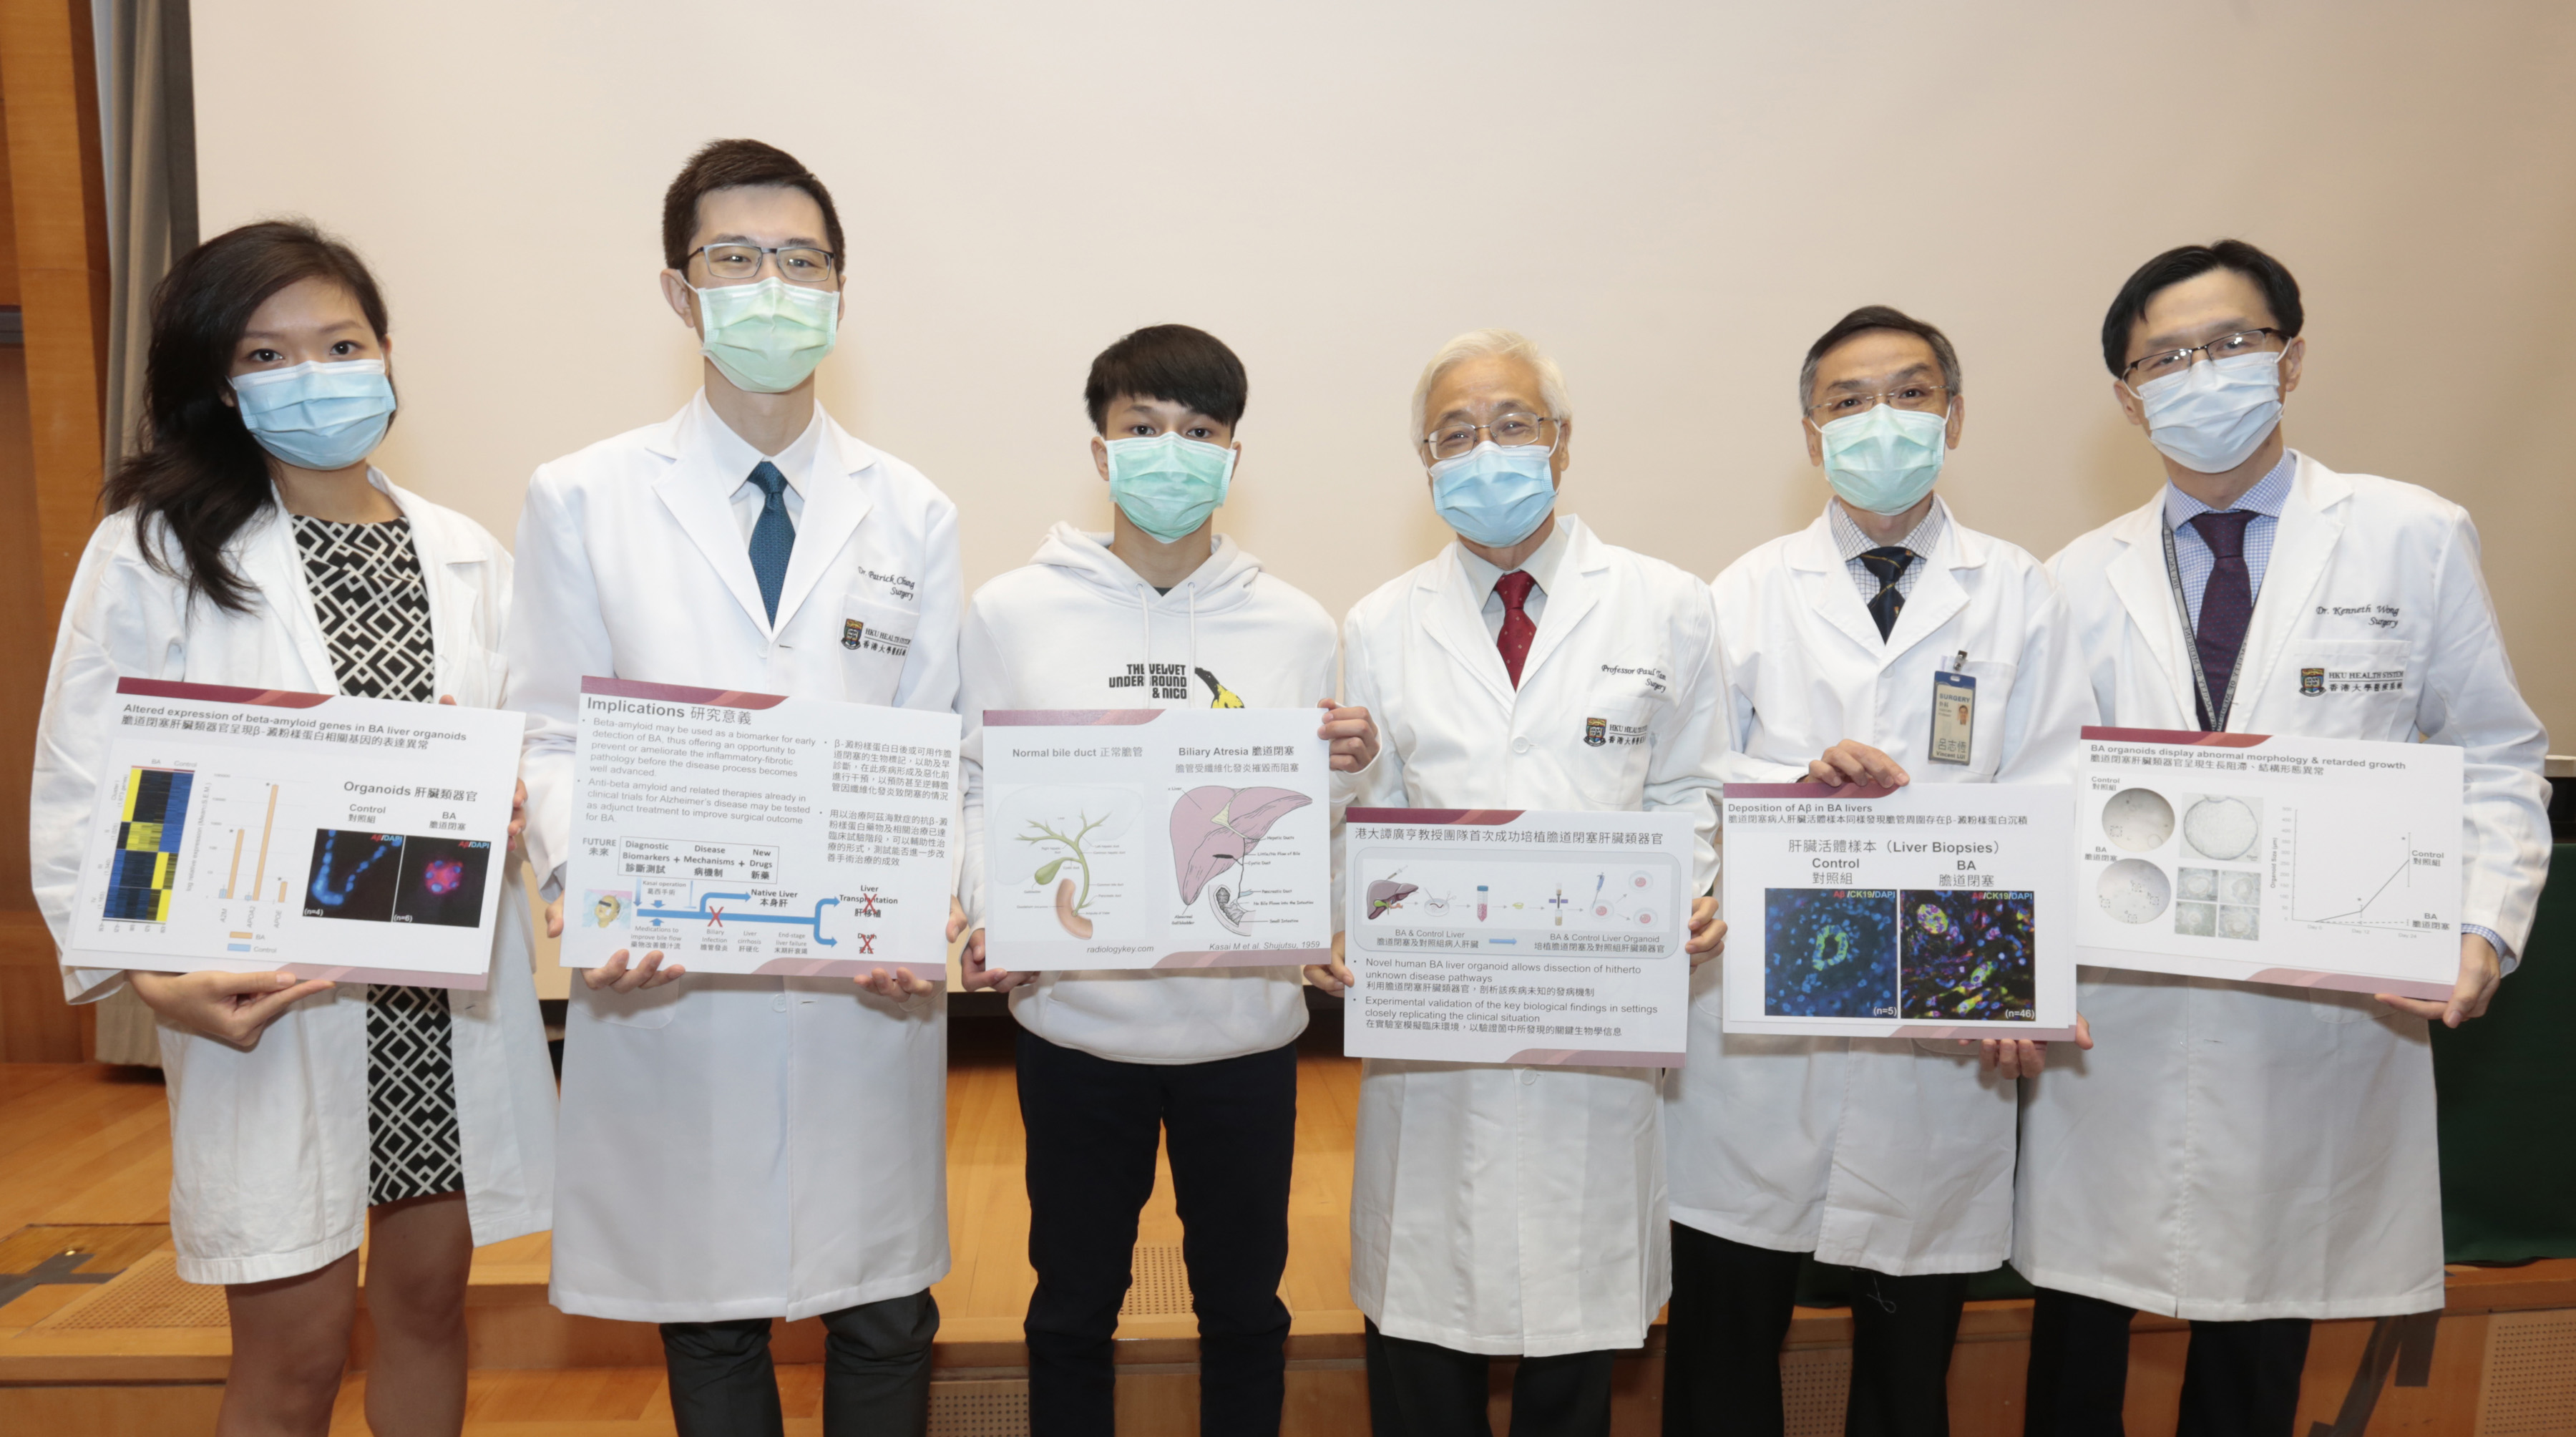 Group photo of the research team led by Professor Paul Tam from HKUMed Surgery.